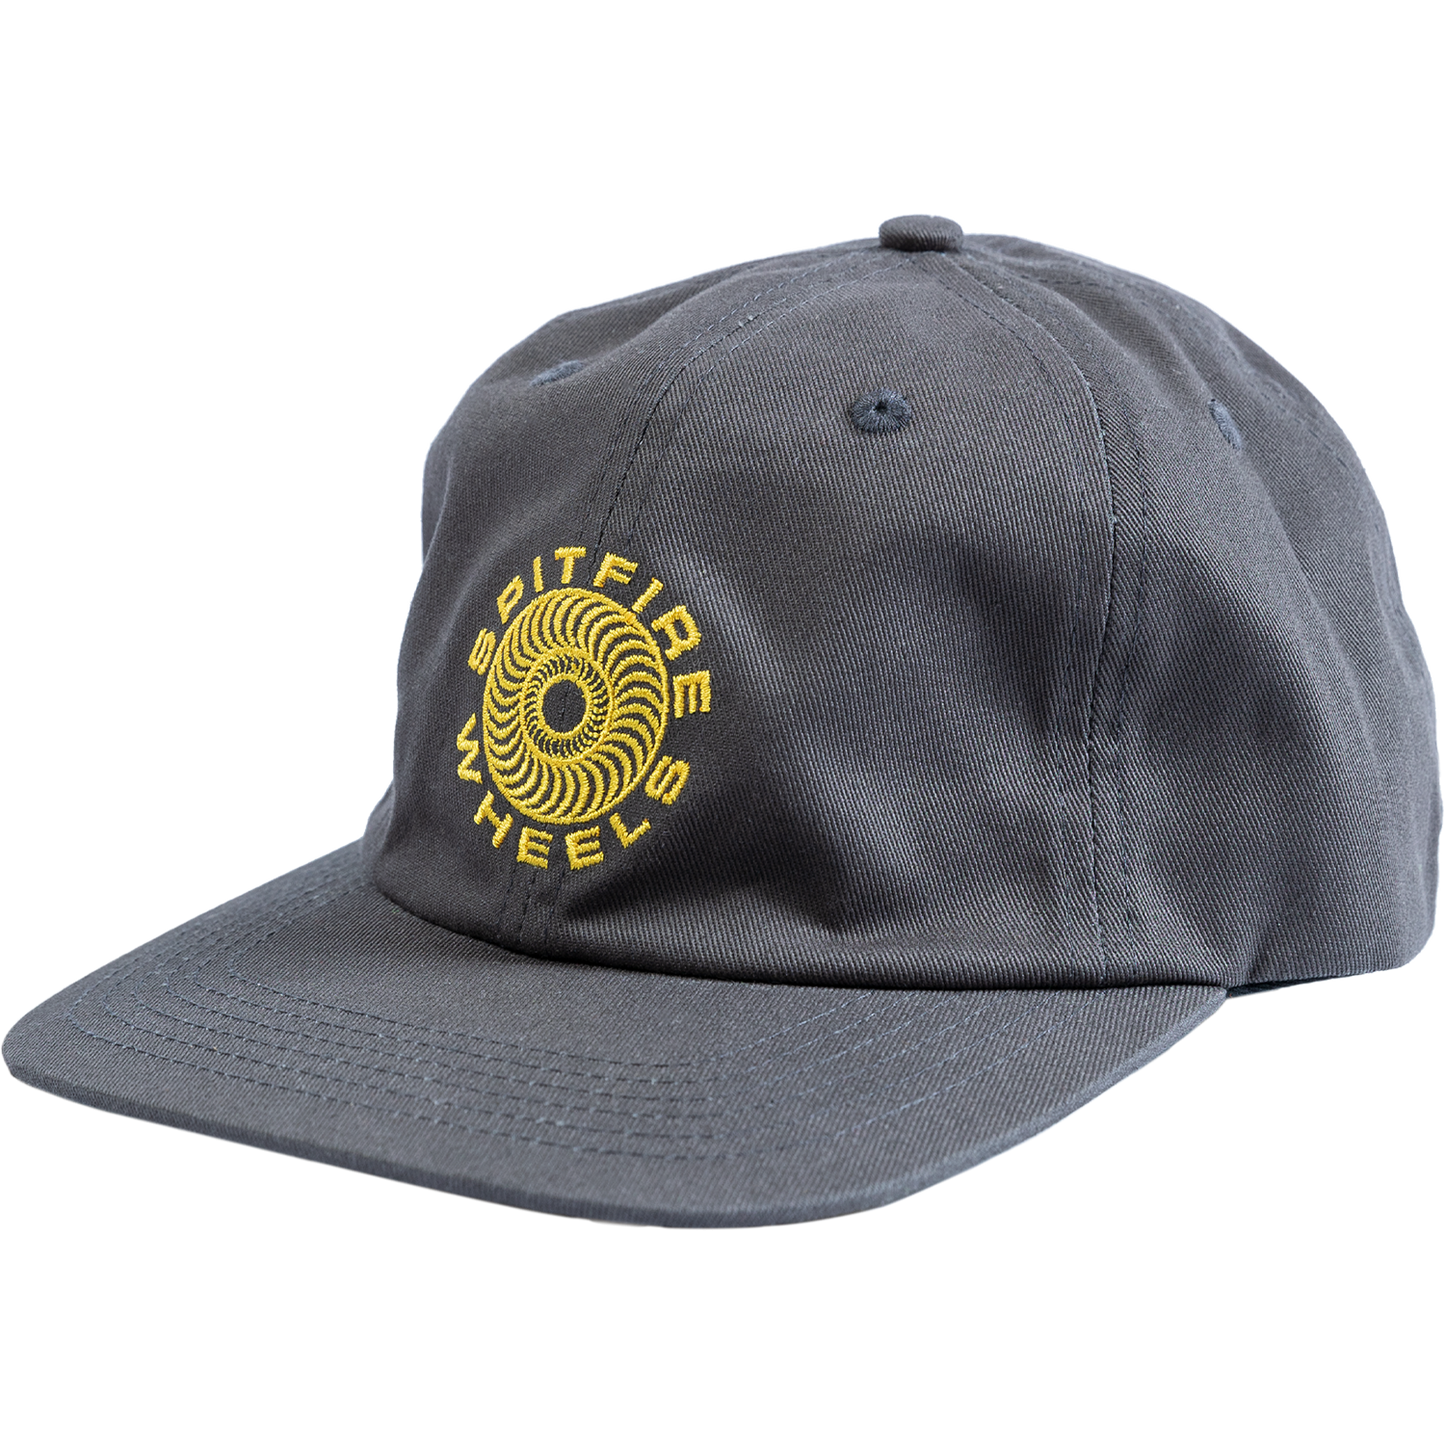 Spitfire Classic 87 Swirl Patch Snapback Hat, Charcoal/Gold